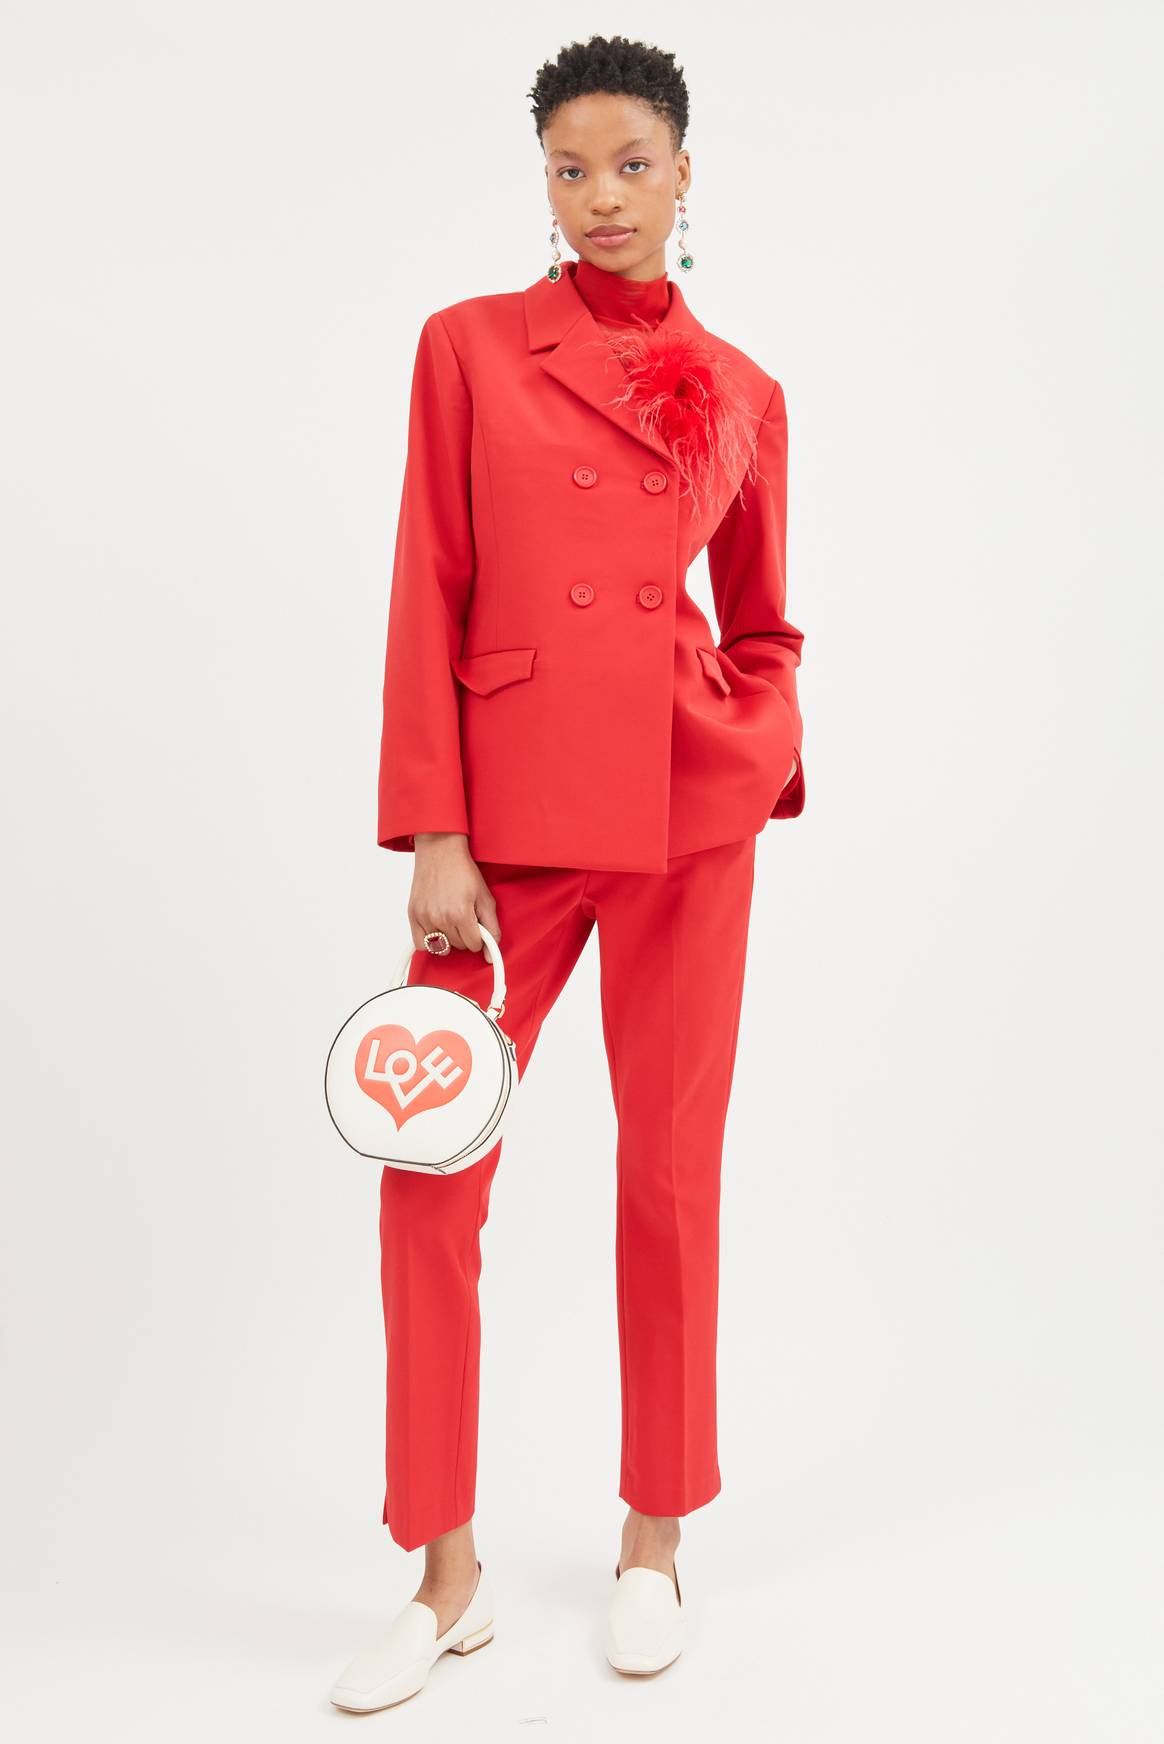 Kate Spade New York Fall 2023 Ready-to-Wear Collection